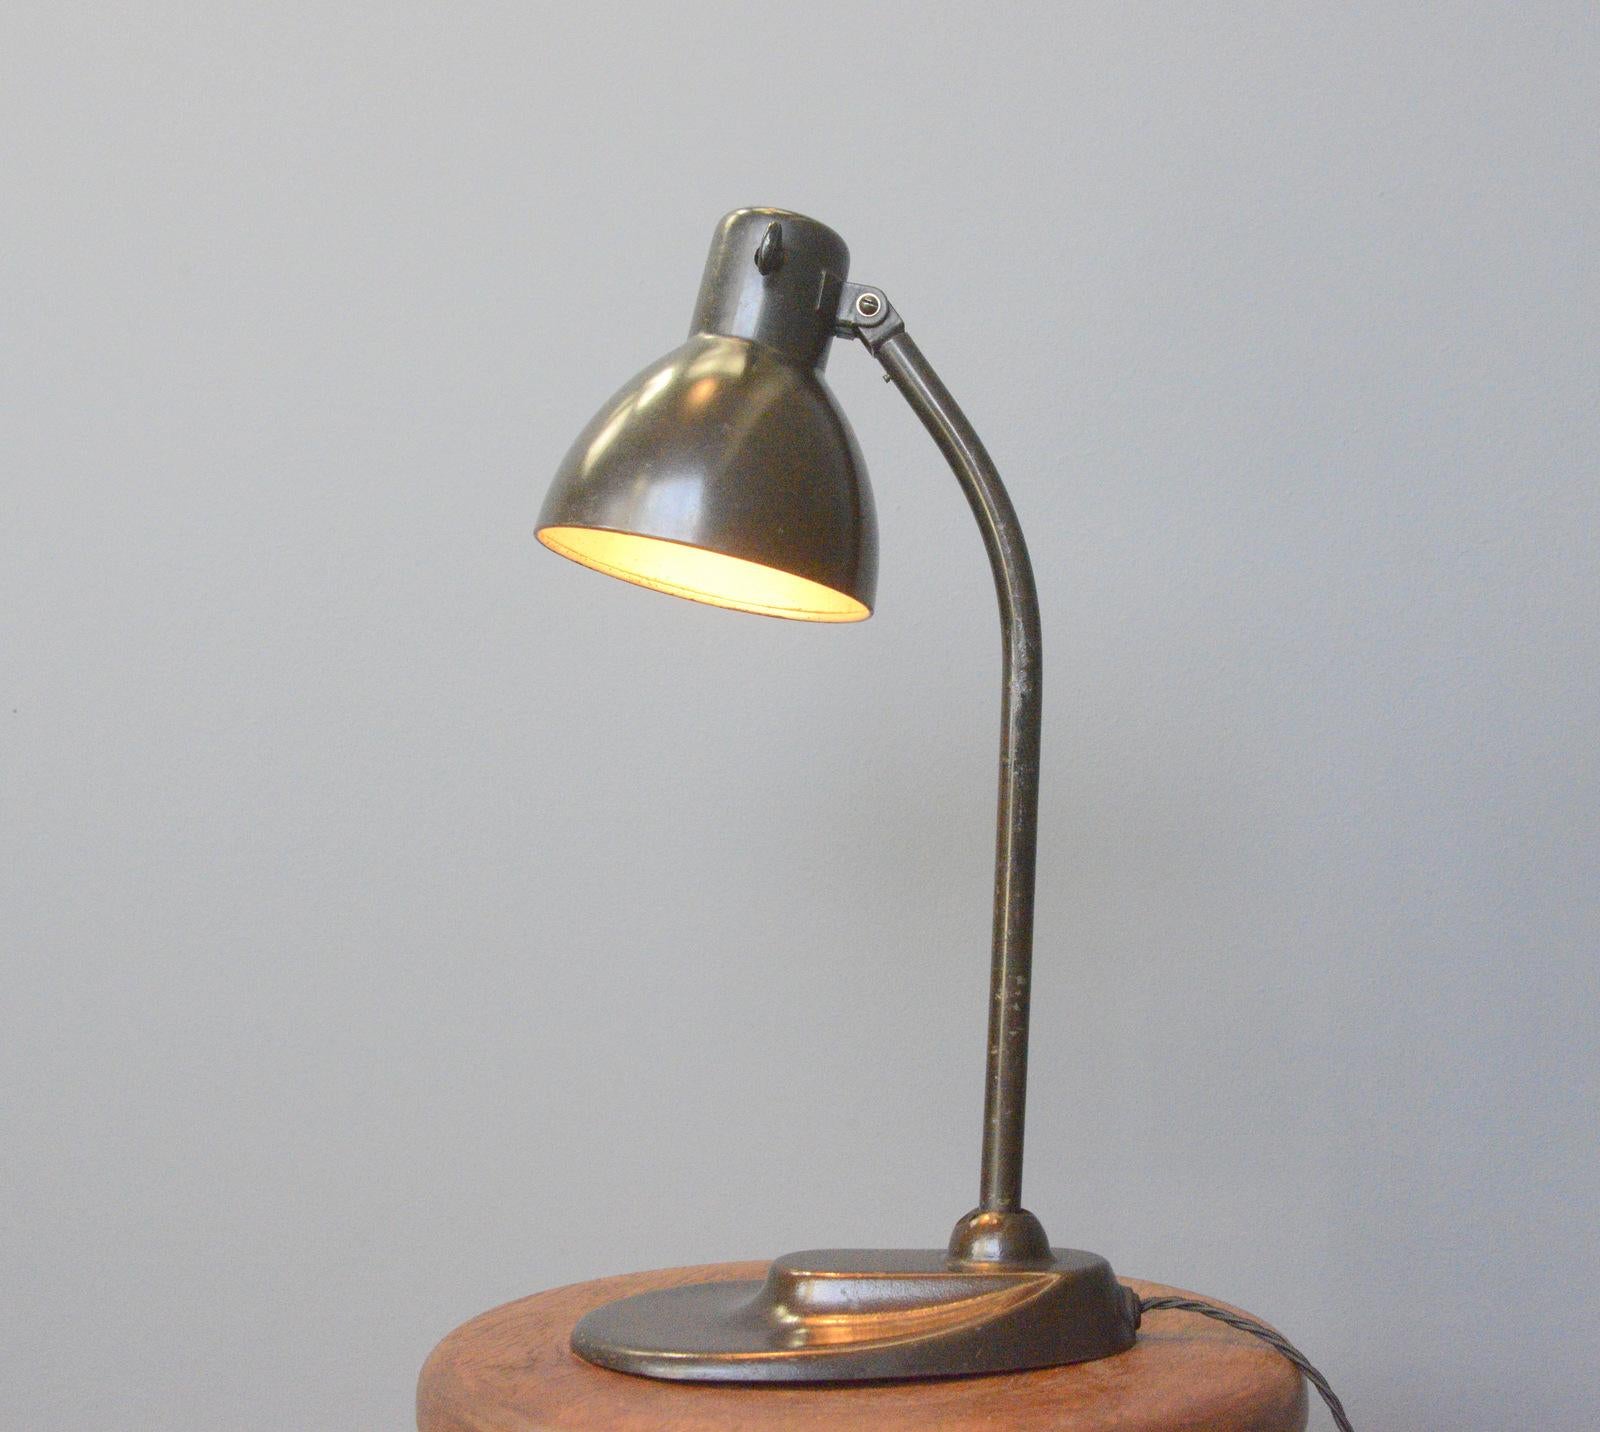 Model 752 table lamp by Kandem Circa 1930s.

- Original brown paint
- Cast iron foot with curved steel arm
- Adjustable shade and arm
- Original bakelite On/Off toggle switch
- Takes E27 fitting bulbs
- Designed by Hin Bredendieck & Hermann